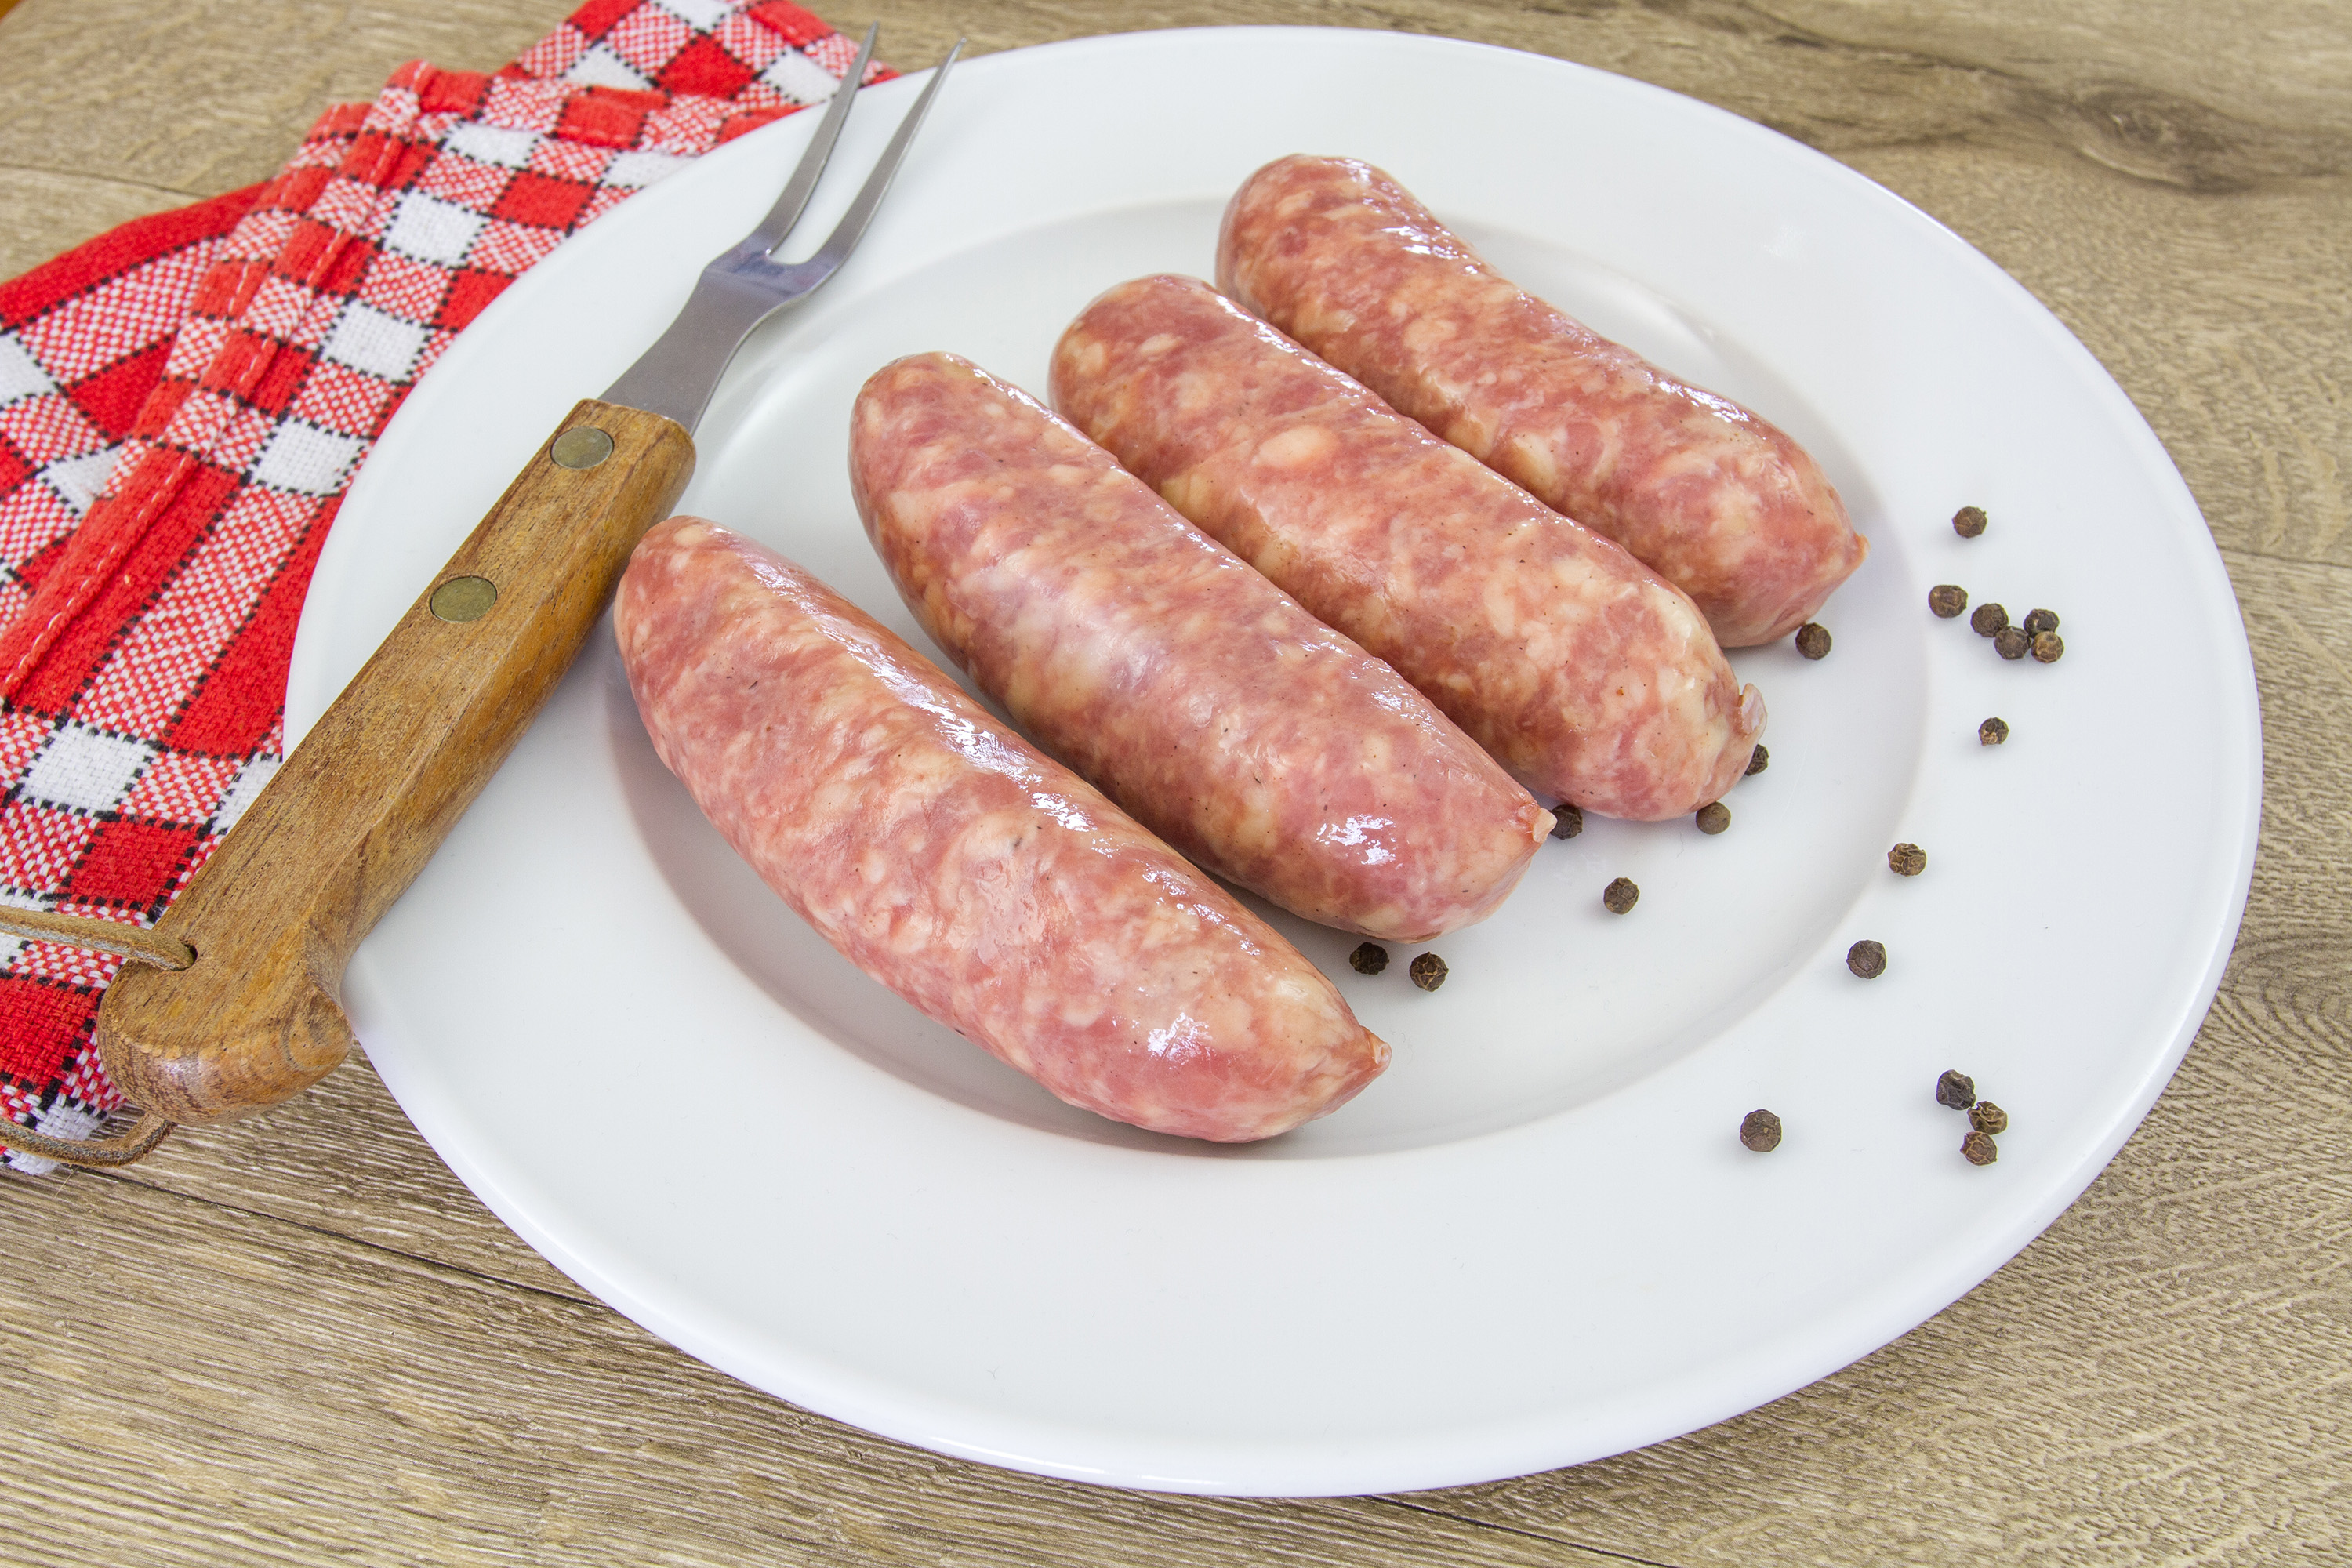 Diot From France Sausage | Savoie, Traditional